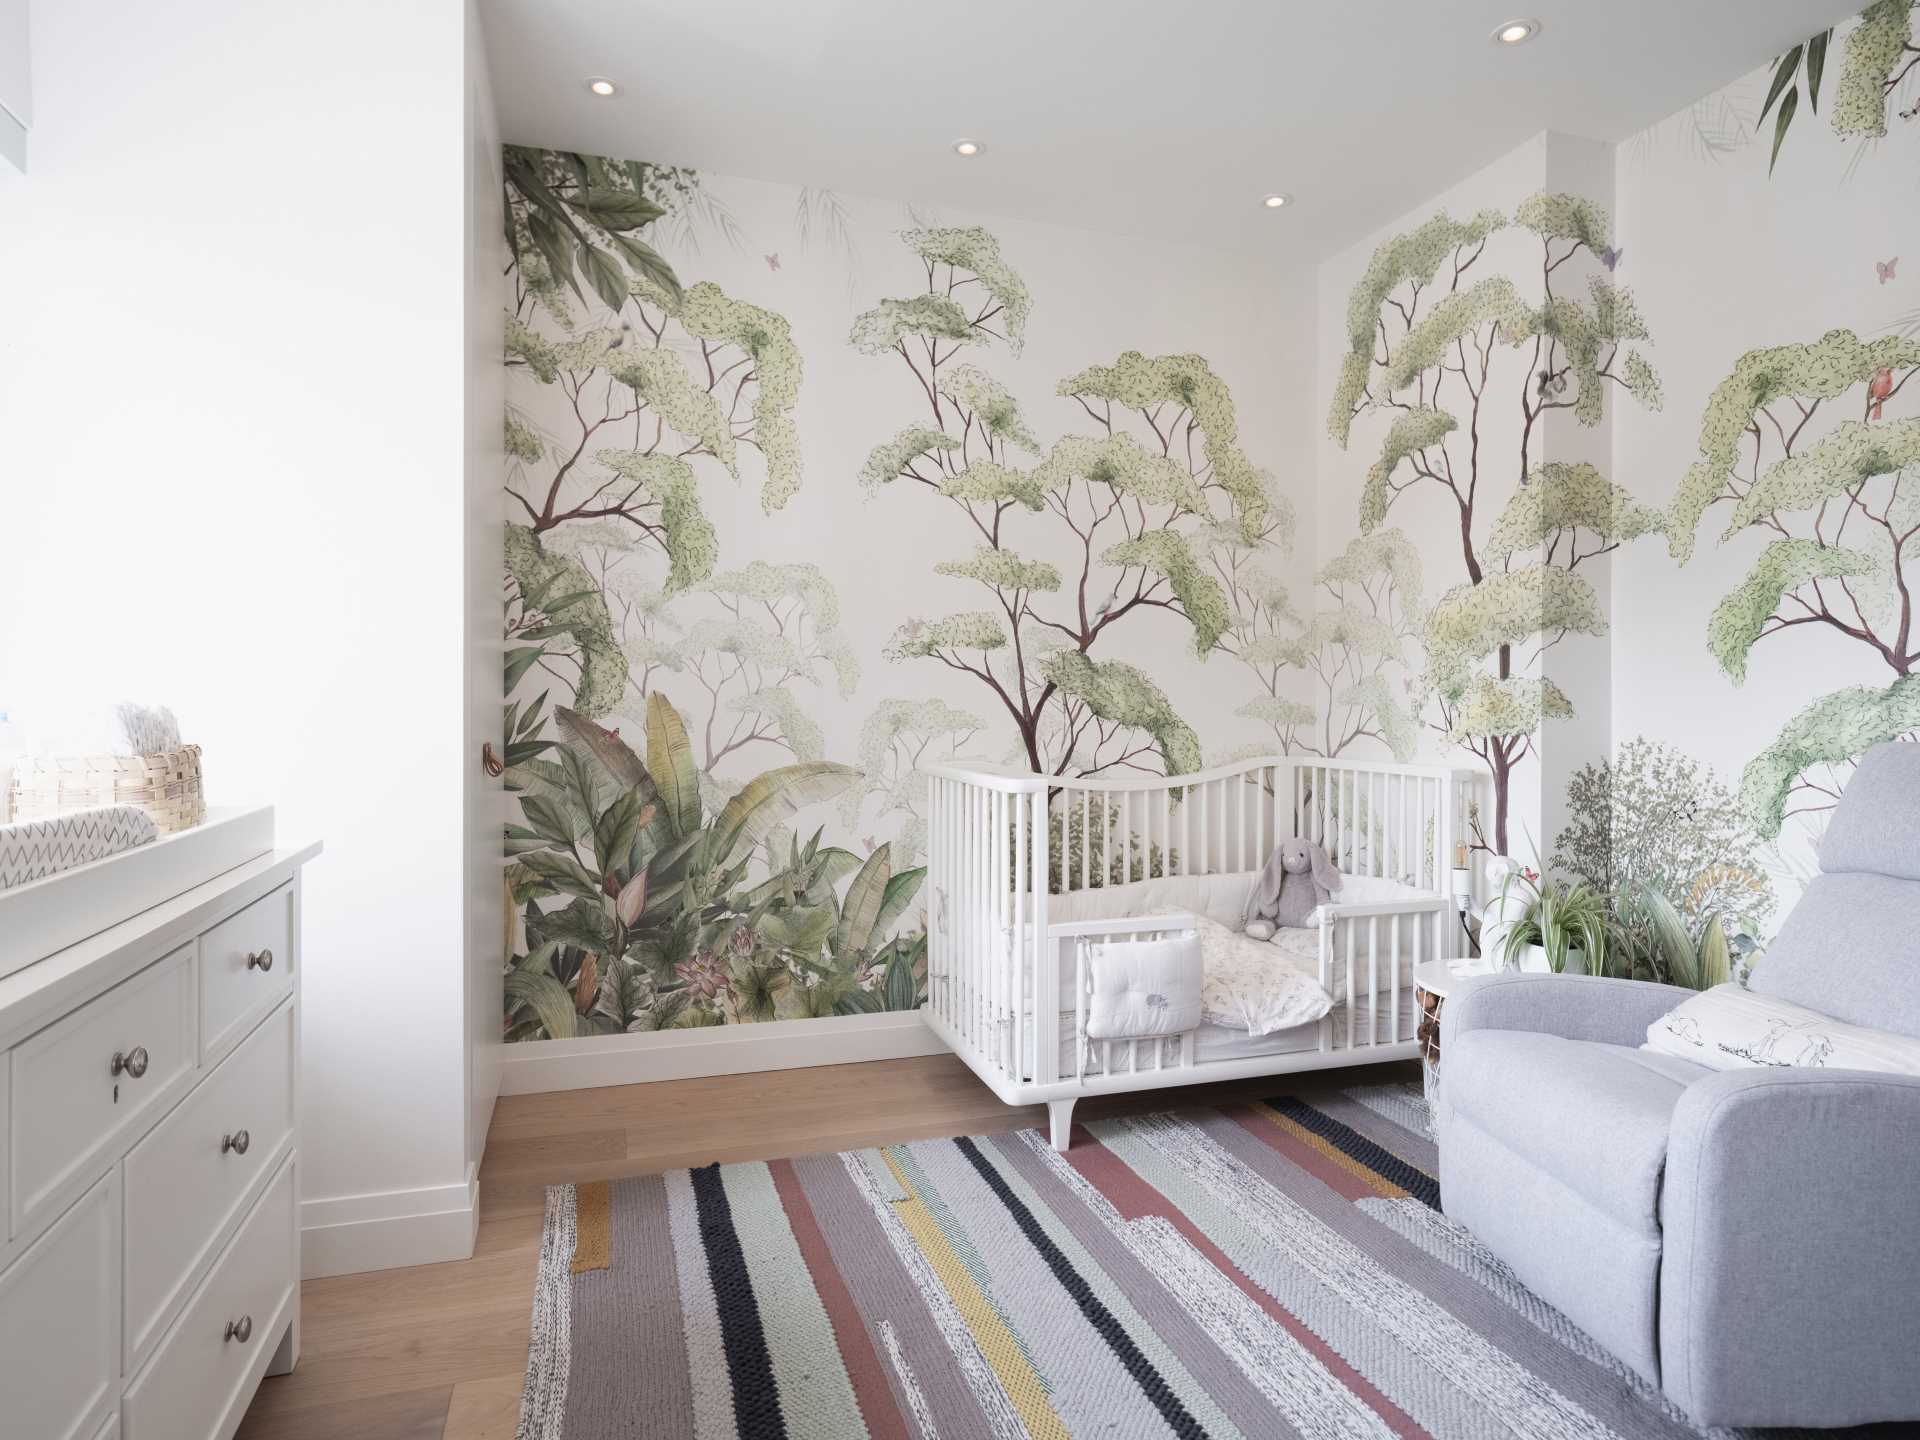 In this modern kids bedroom, a forest mural has been applied to the wall, adding a natural element to the space.